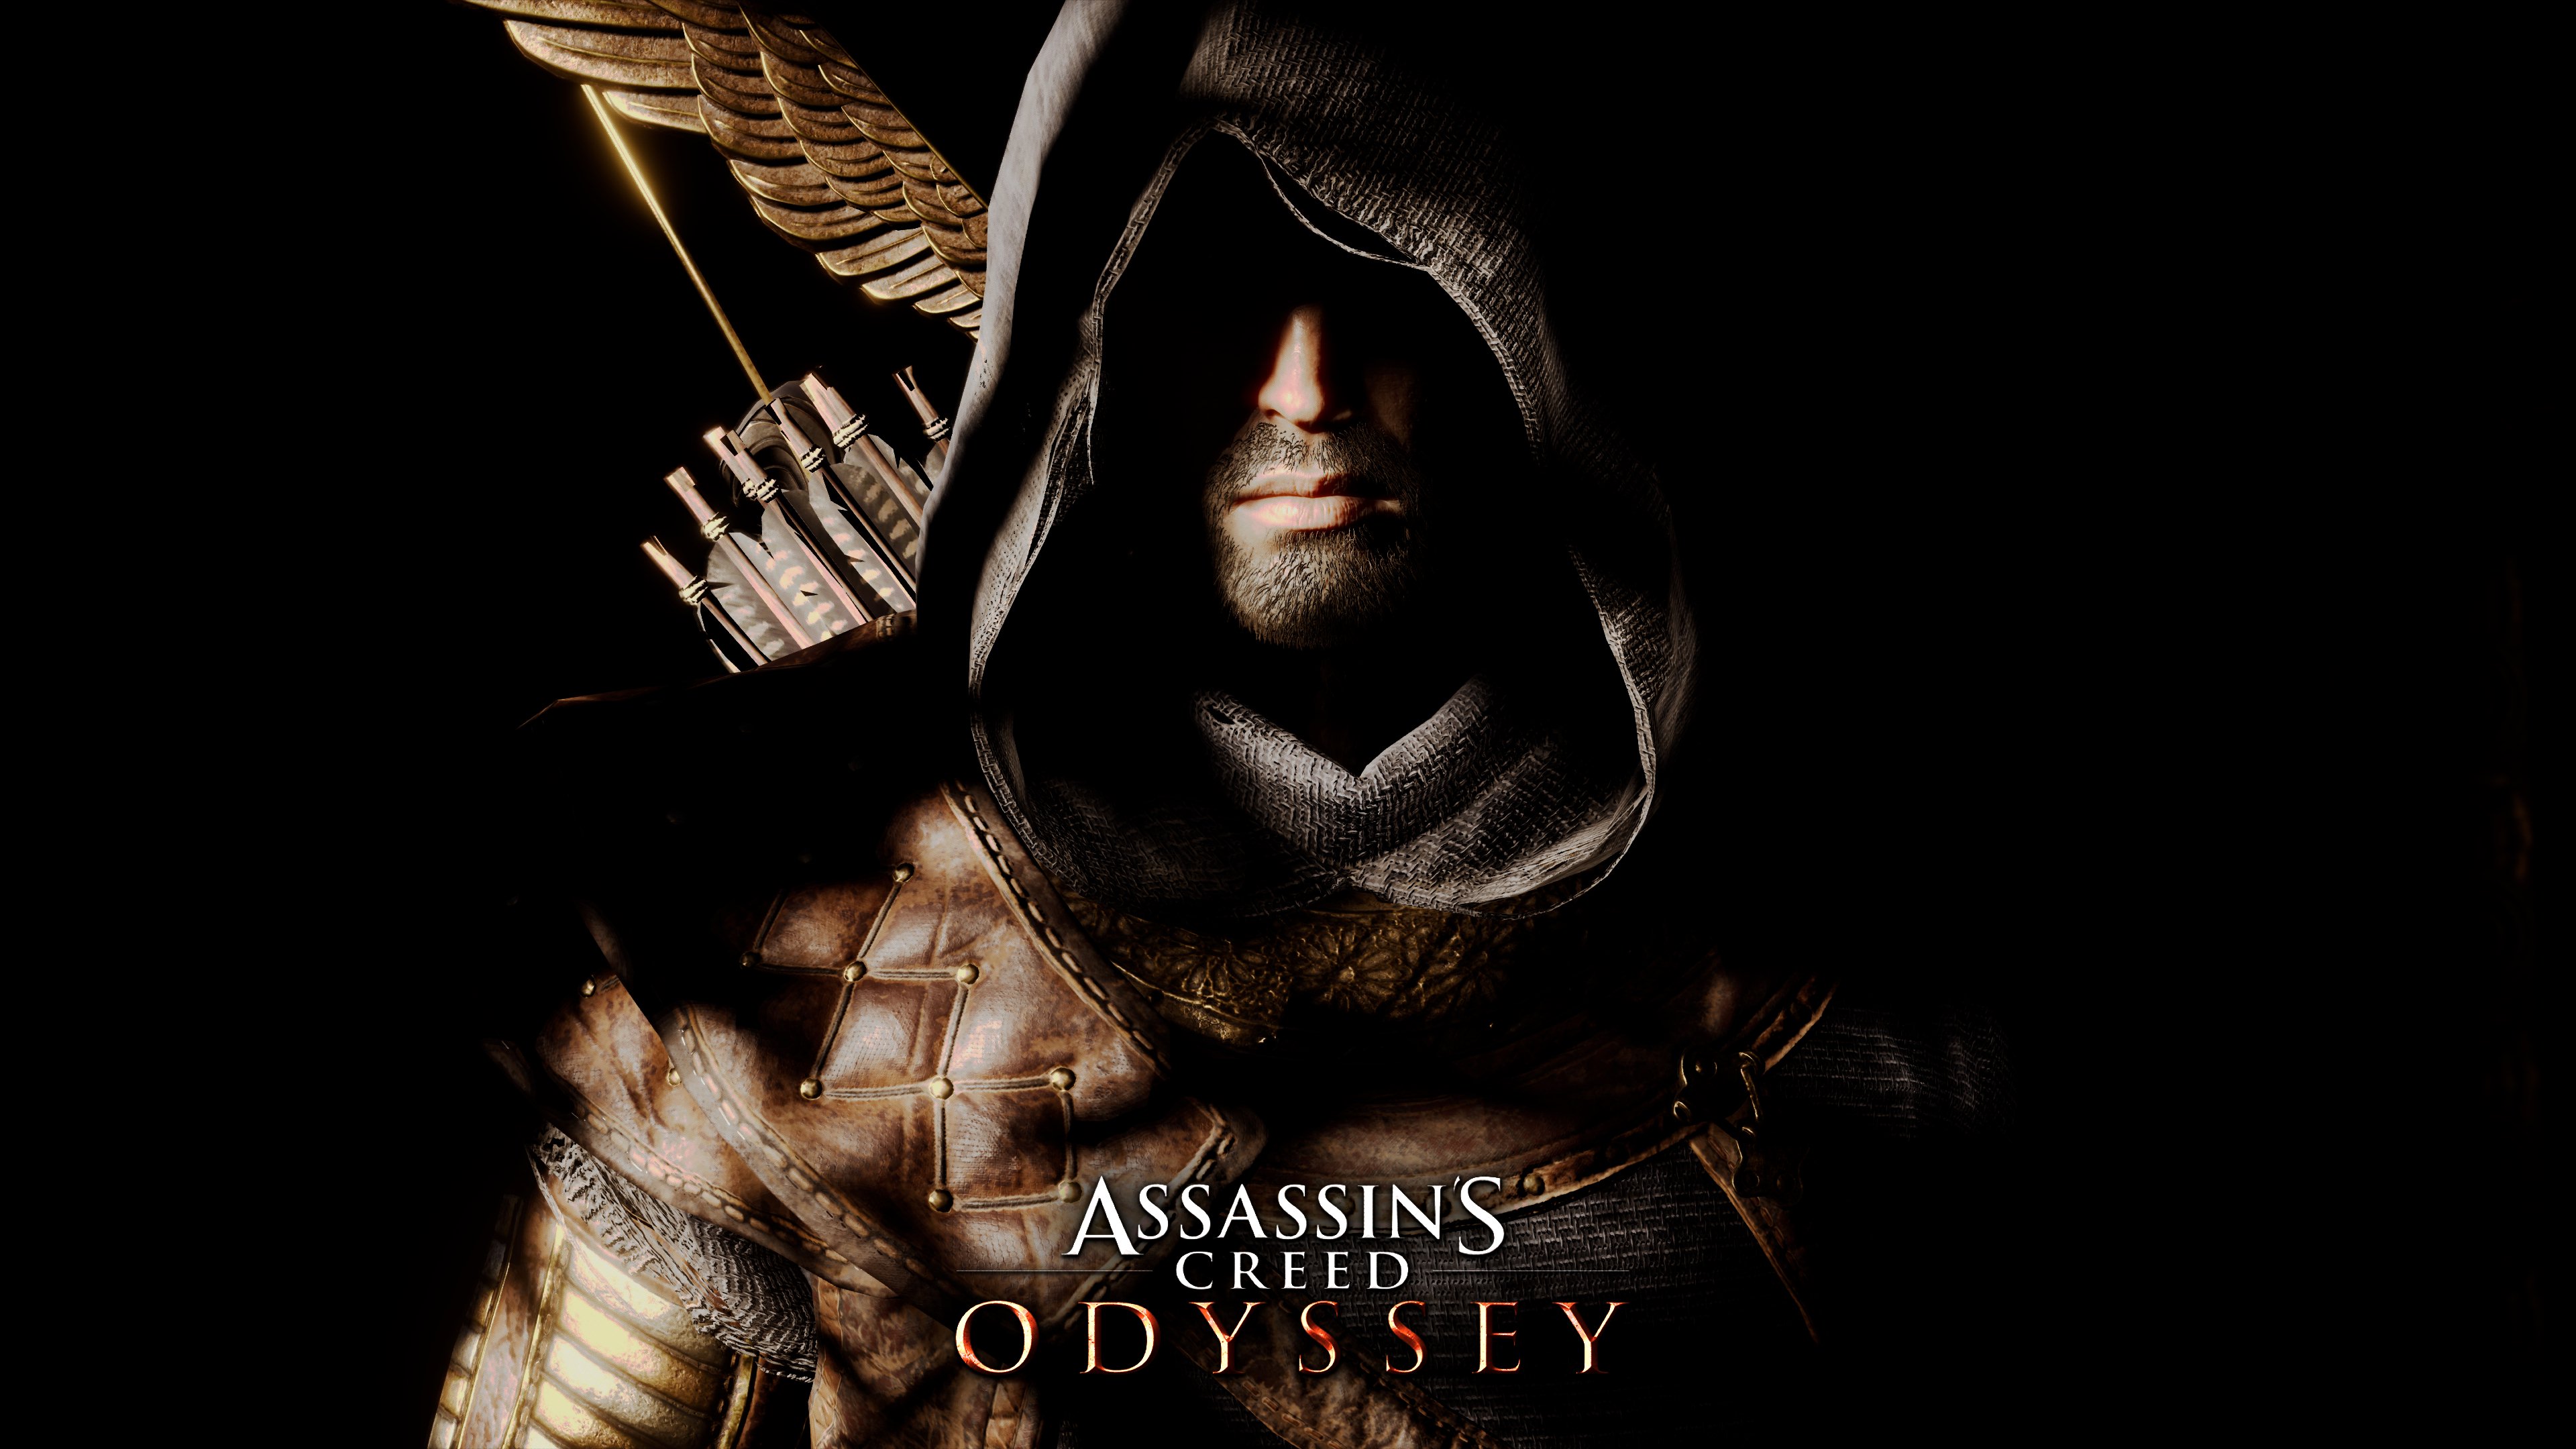 Assassins Creed Odyssey Soldier 4k, HD Games, 4k Wallpapers, Images